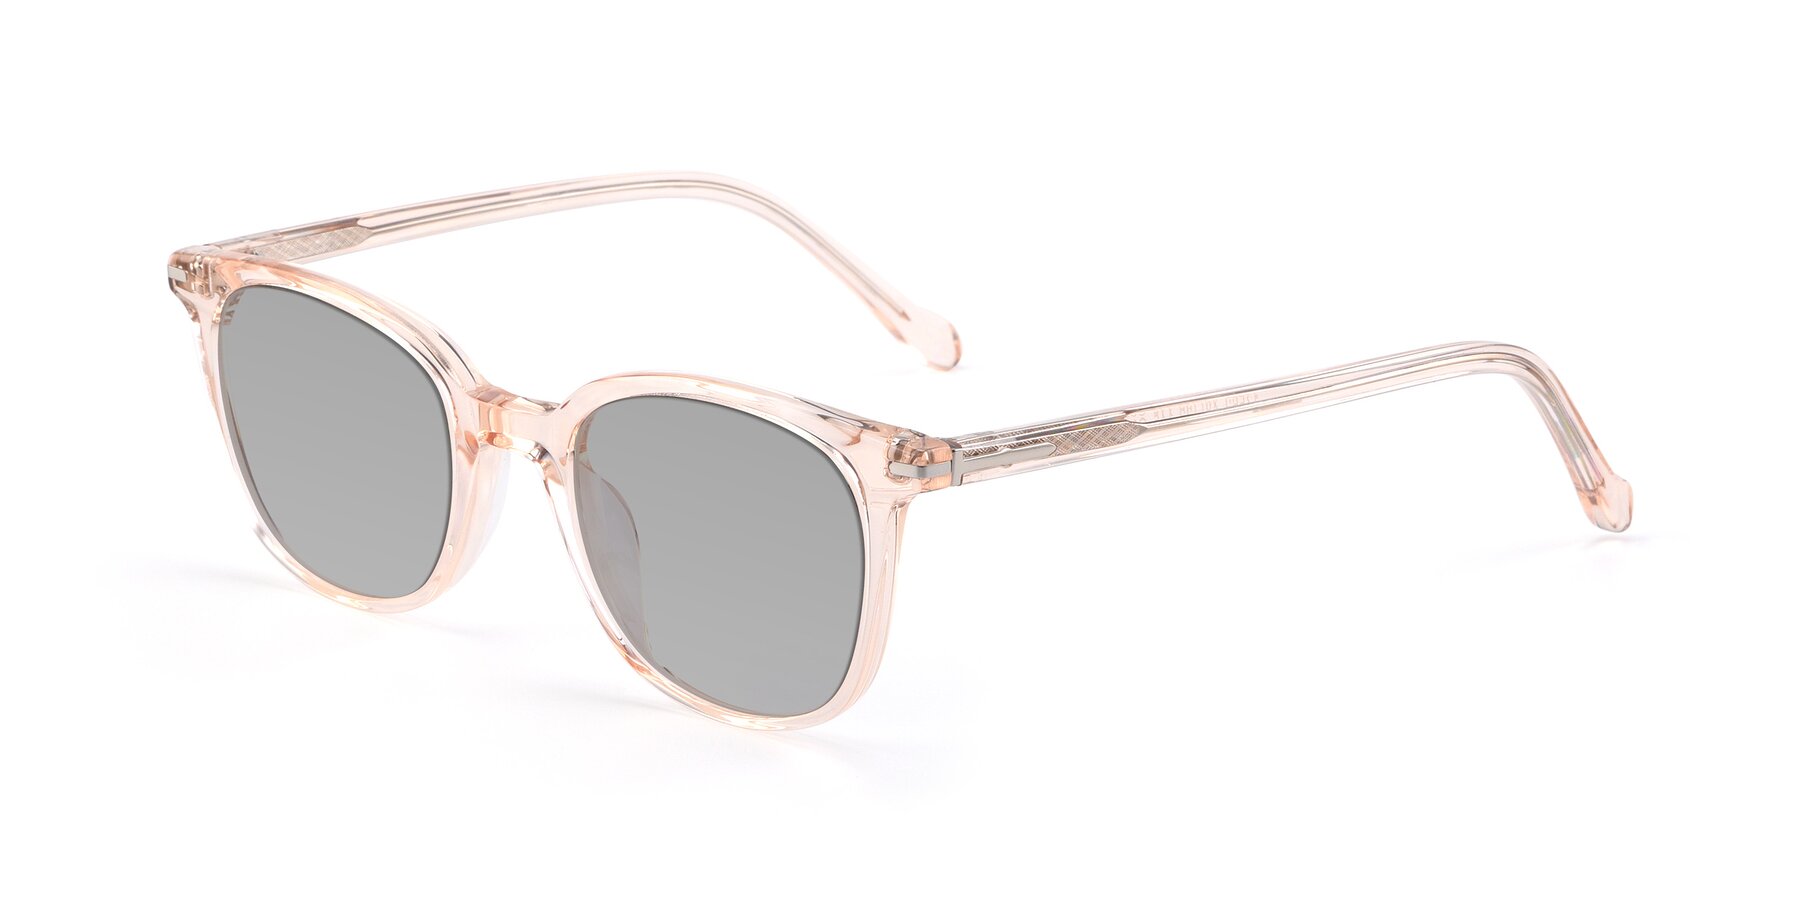 Angle of 17562 in Transparent Pink with Light Gray Tinted Lenses